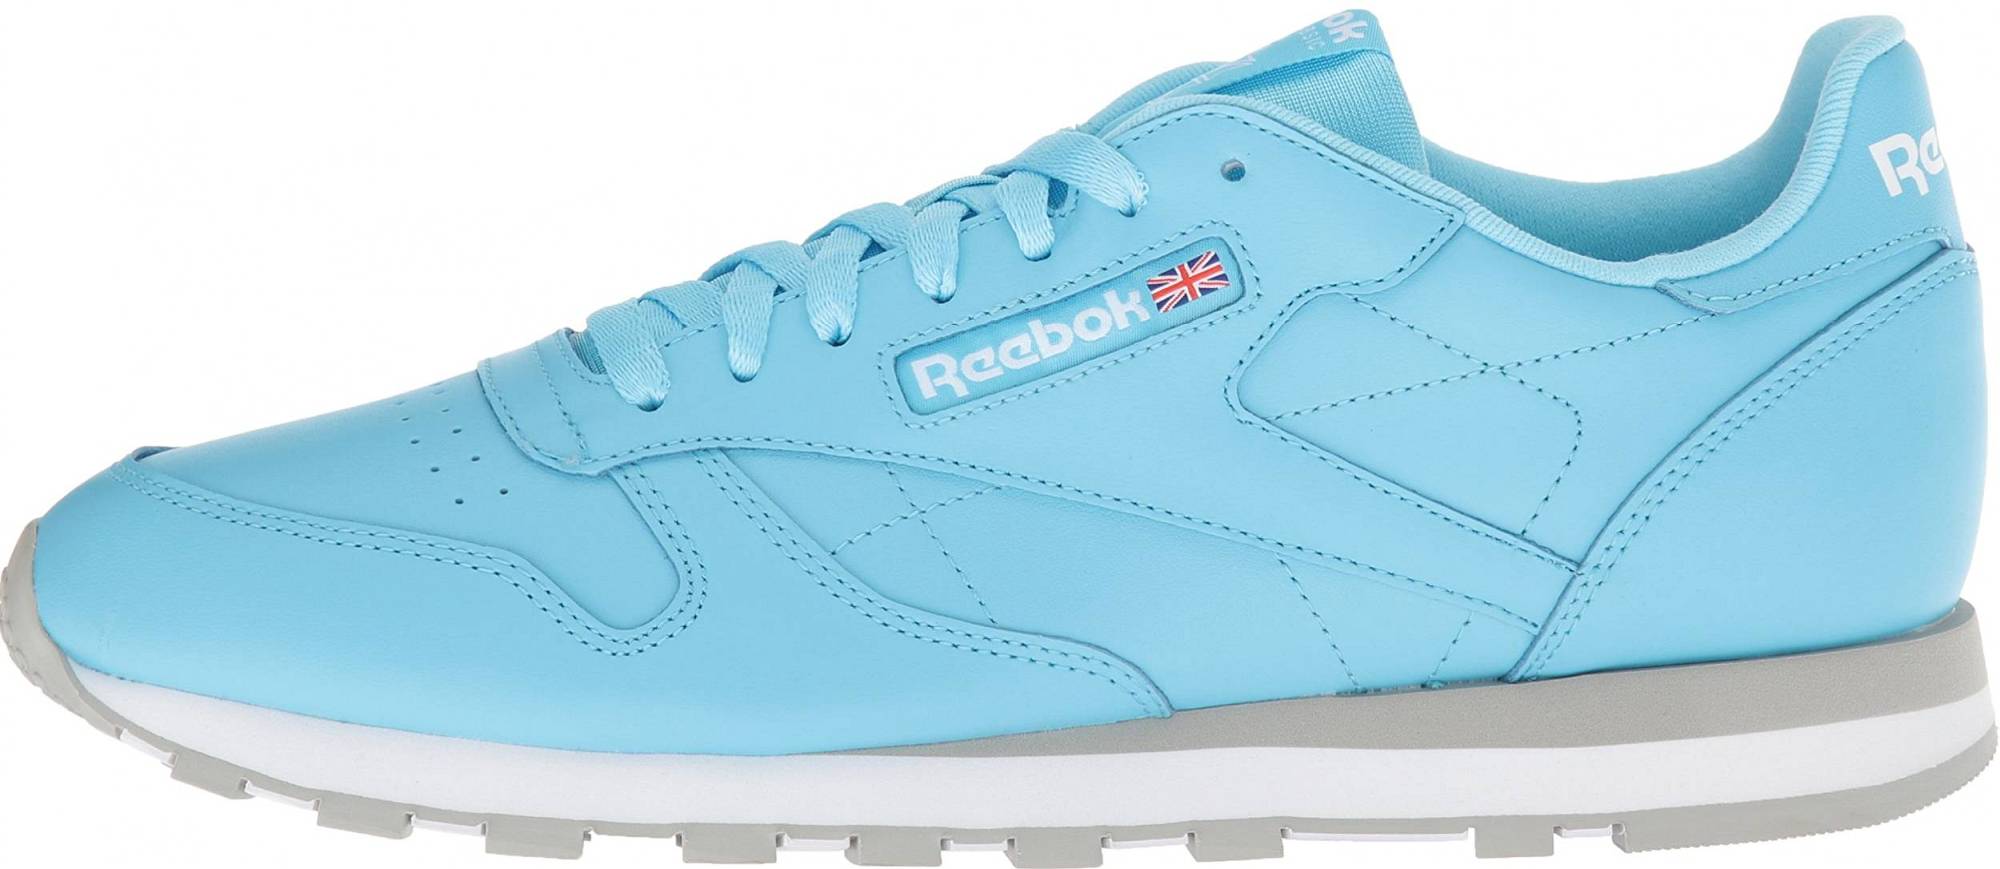 Reebok Classic Leather – Shoes Reviews & Reasons To Buy